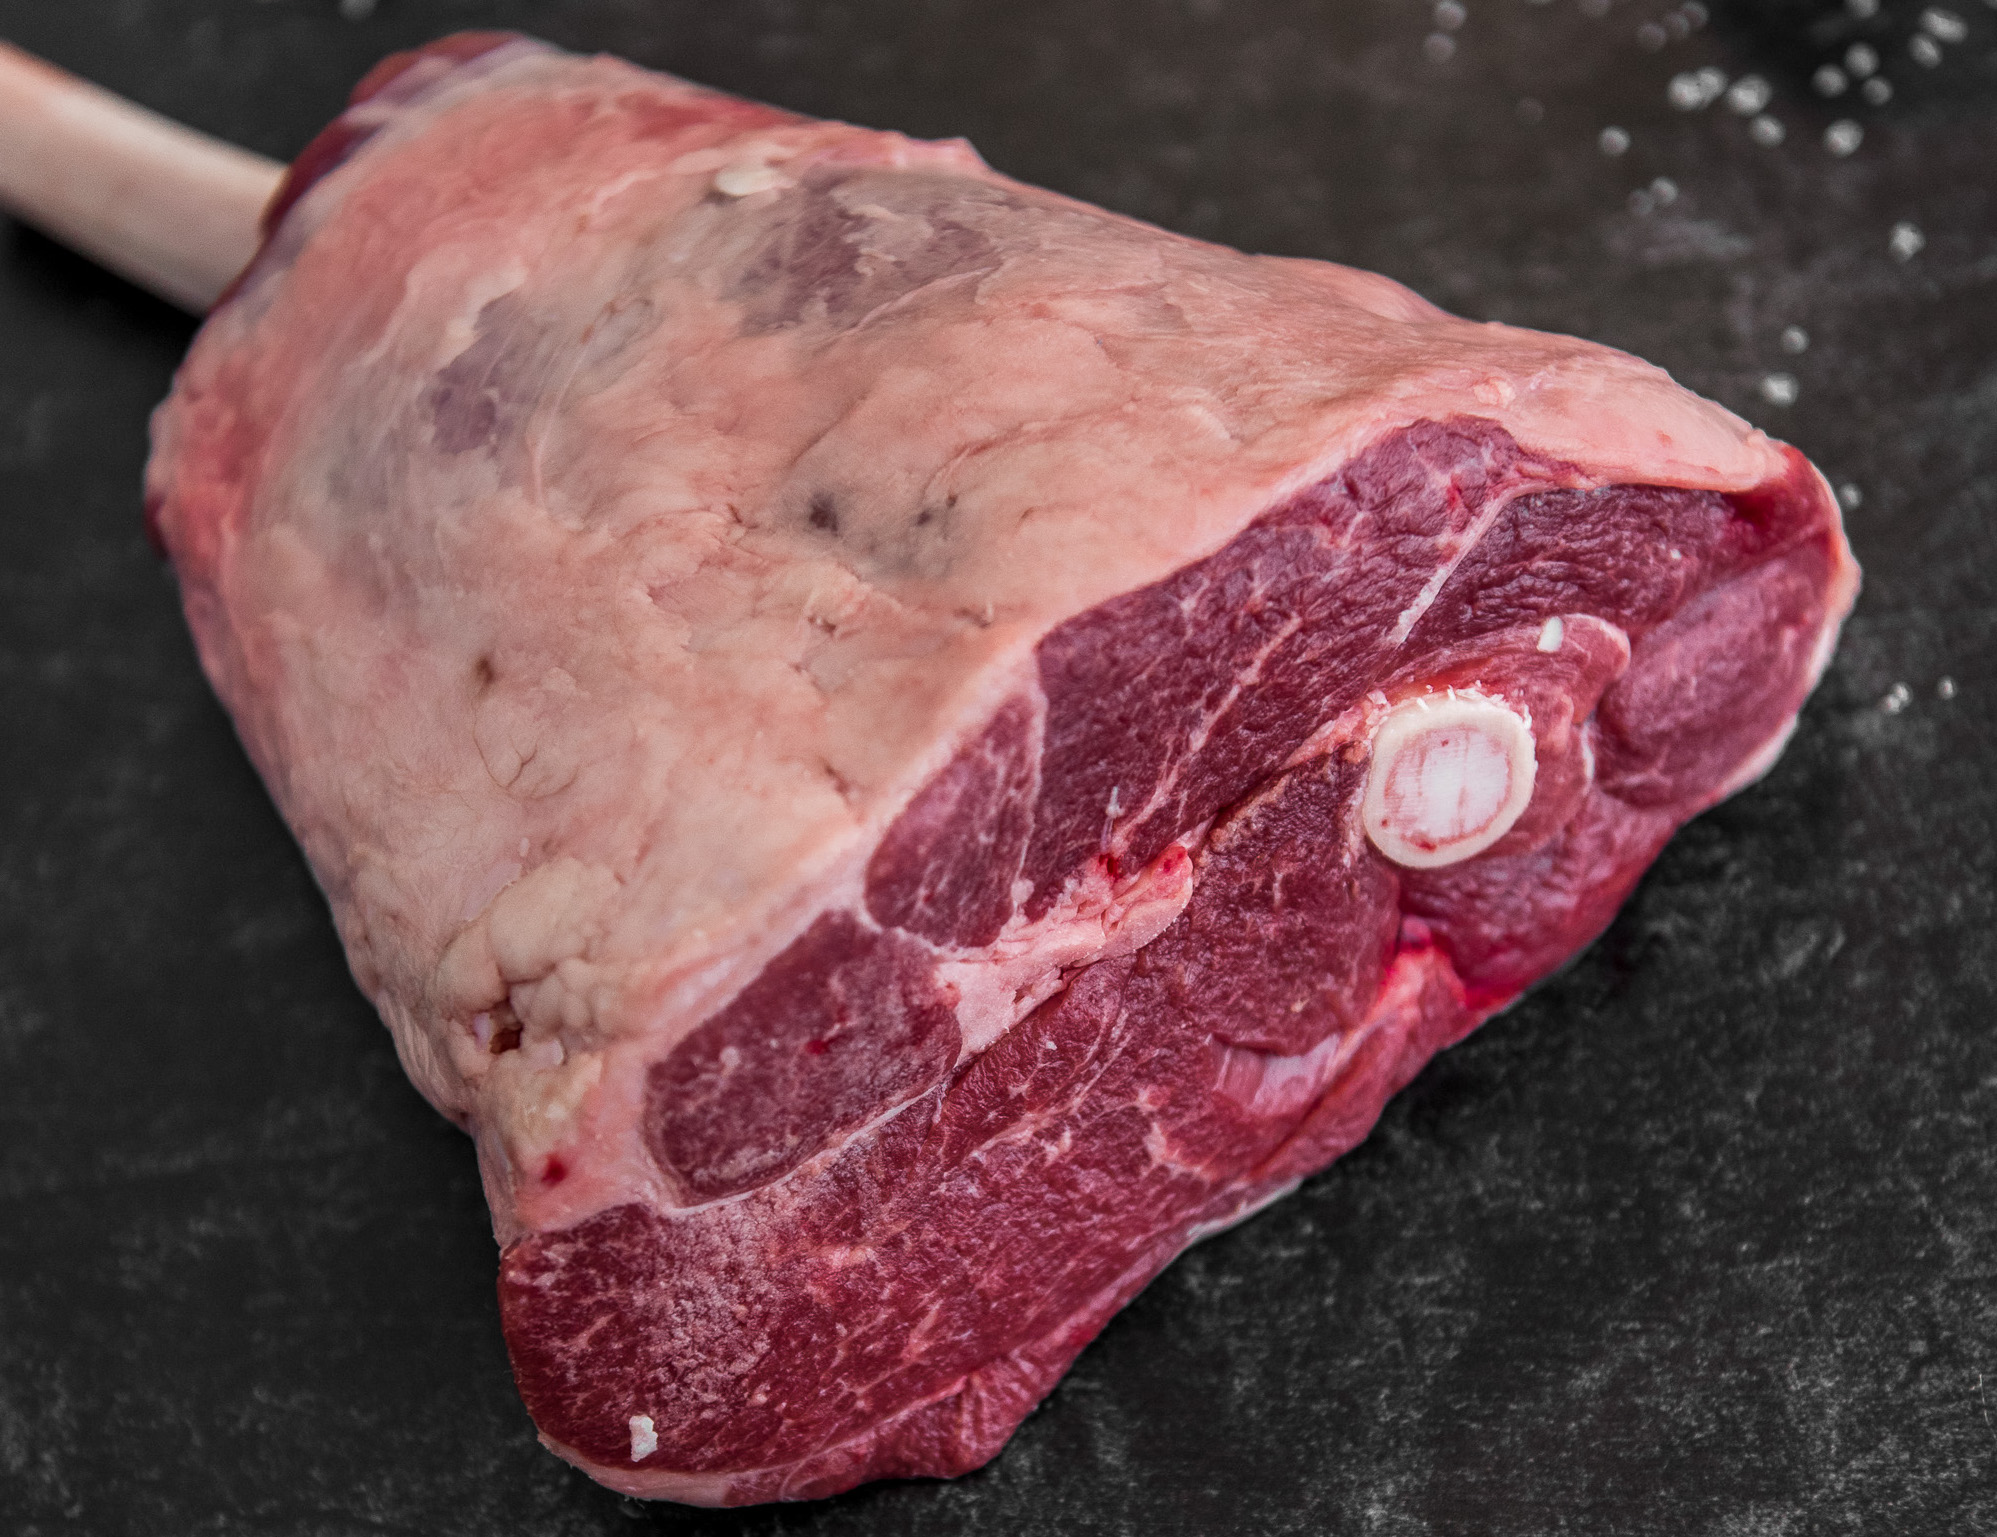 leg of lamb. bone-in and boneless available. Also used to make Greek marinated lamb tips.